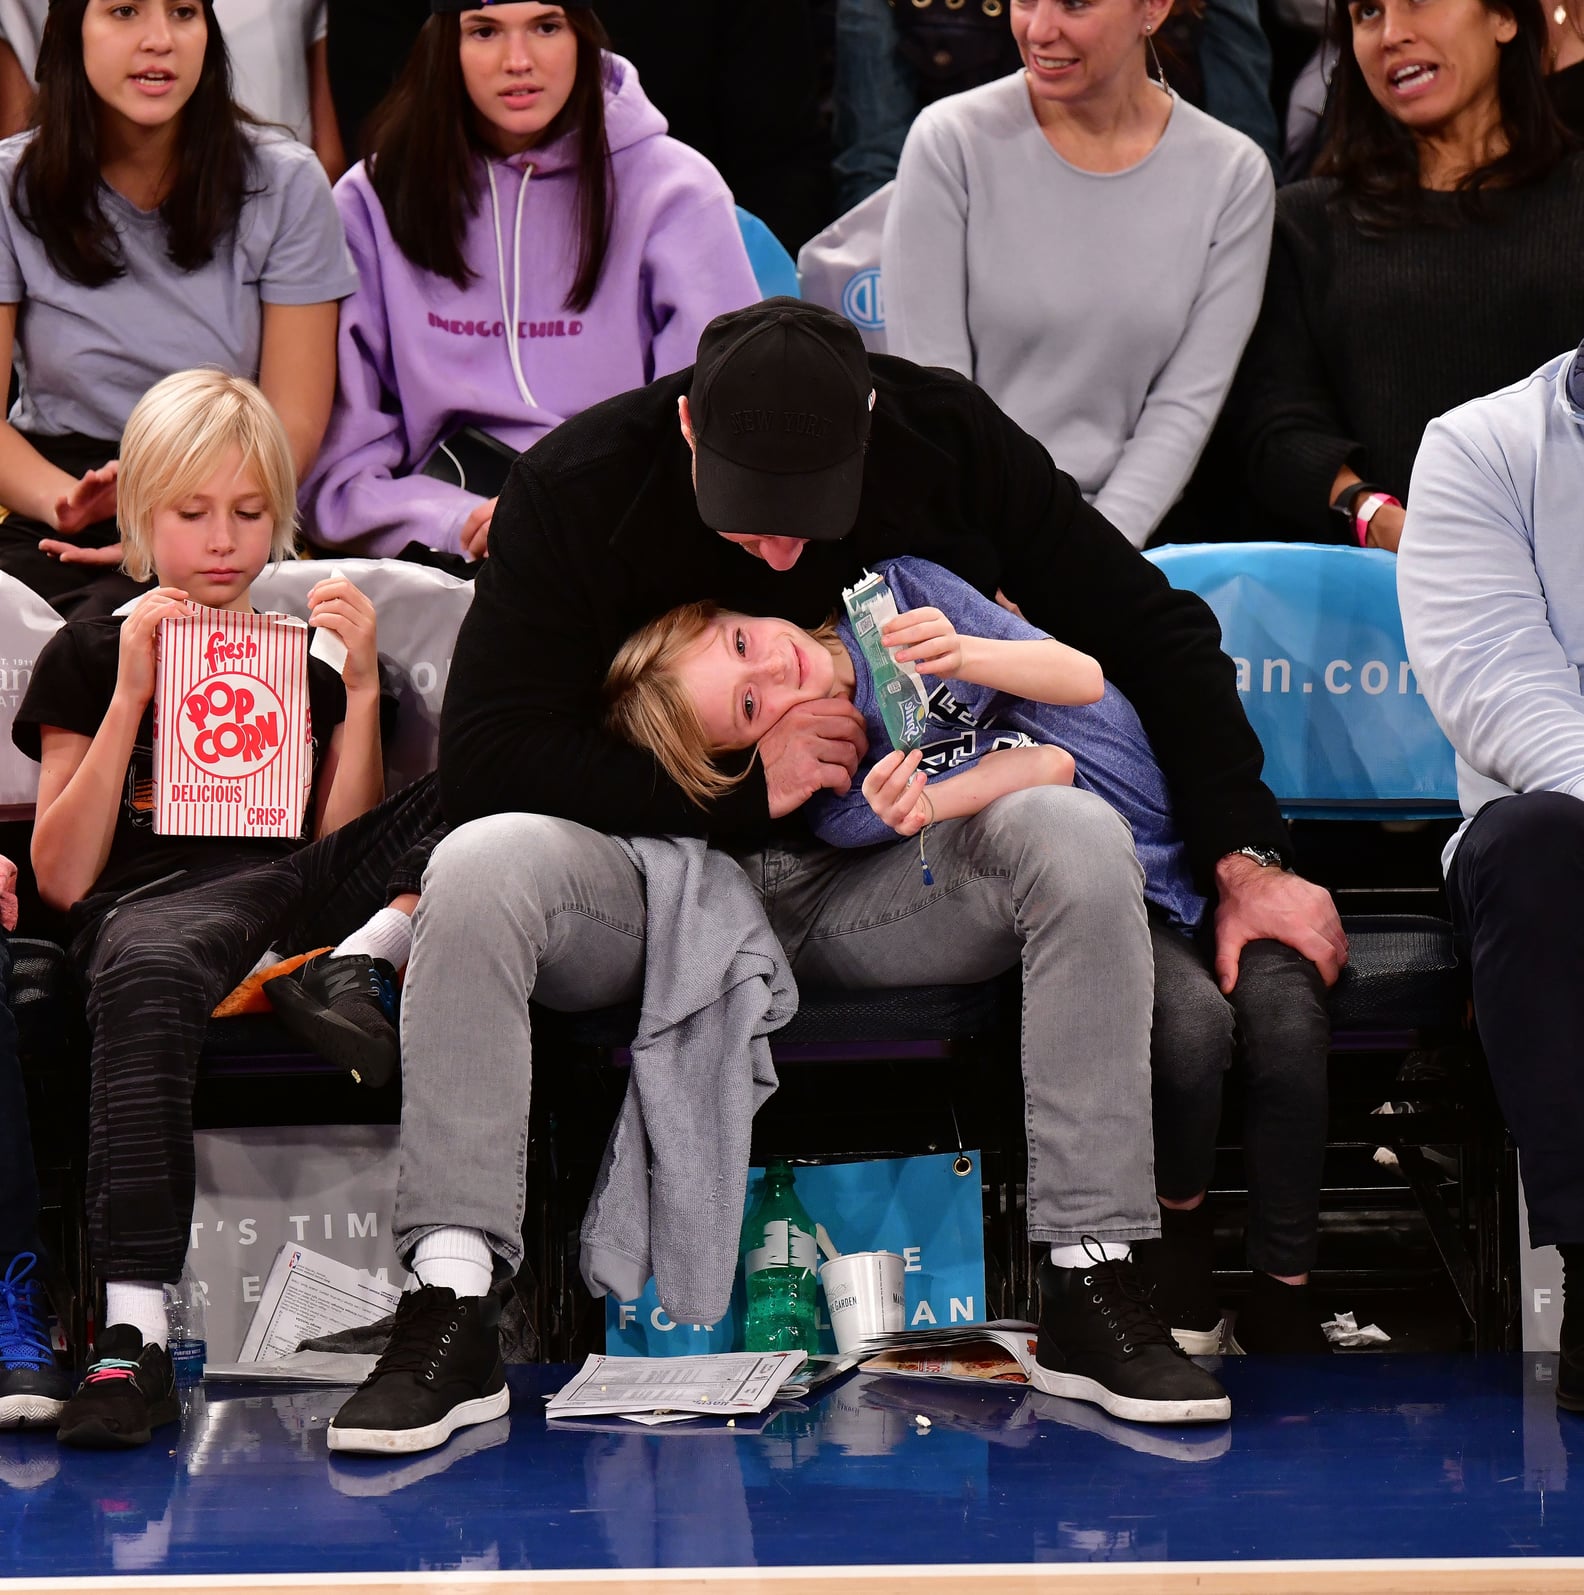 Liev Schreiber and His Sons at Basketball Game in NYC 2017 | POPSUGAR ...